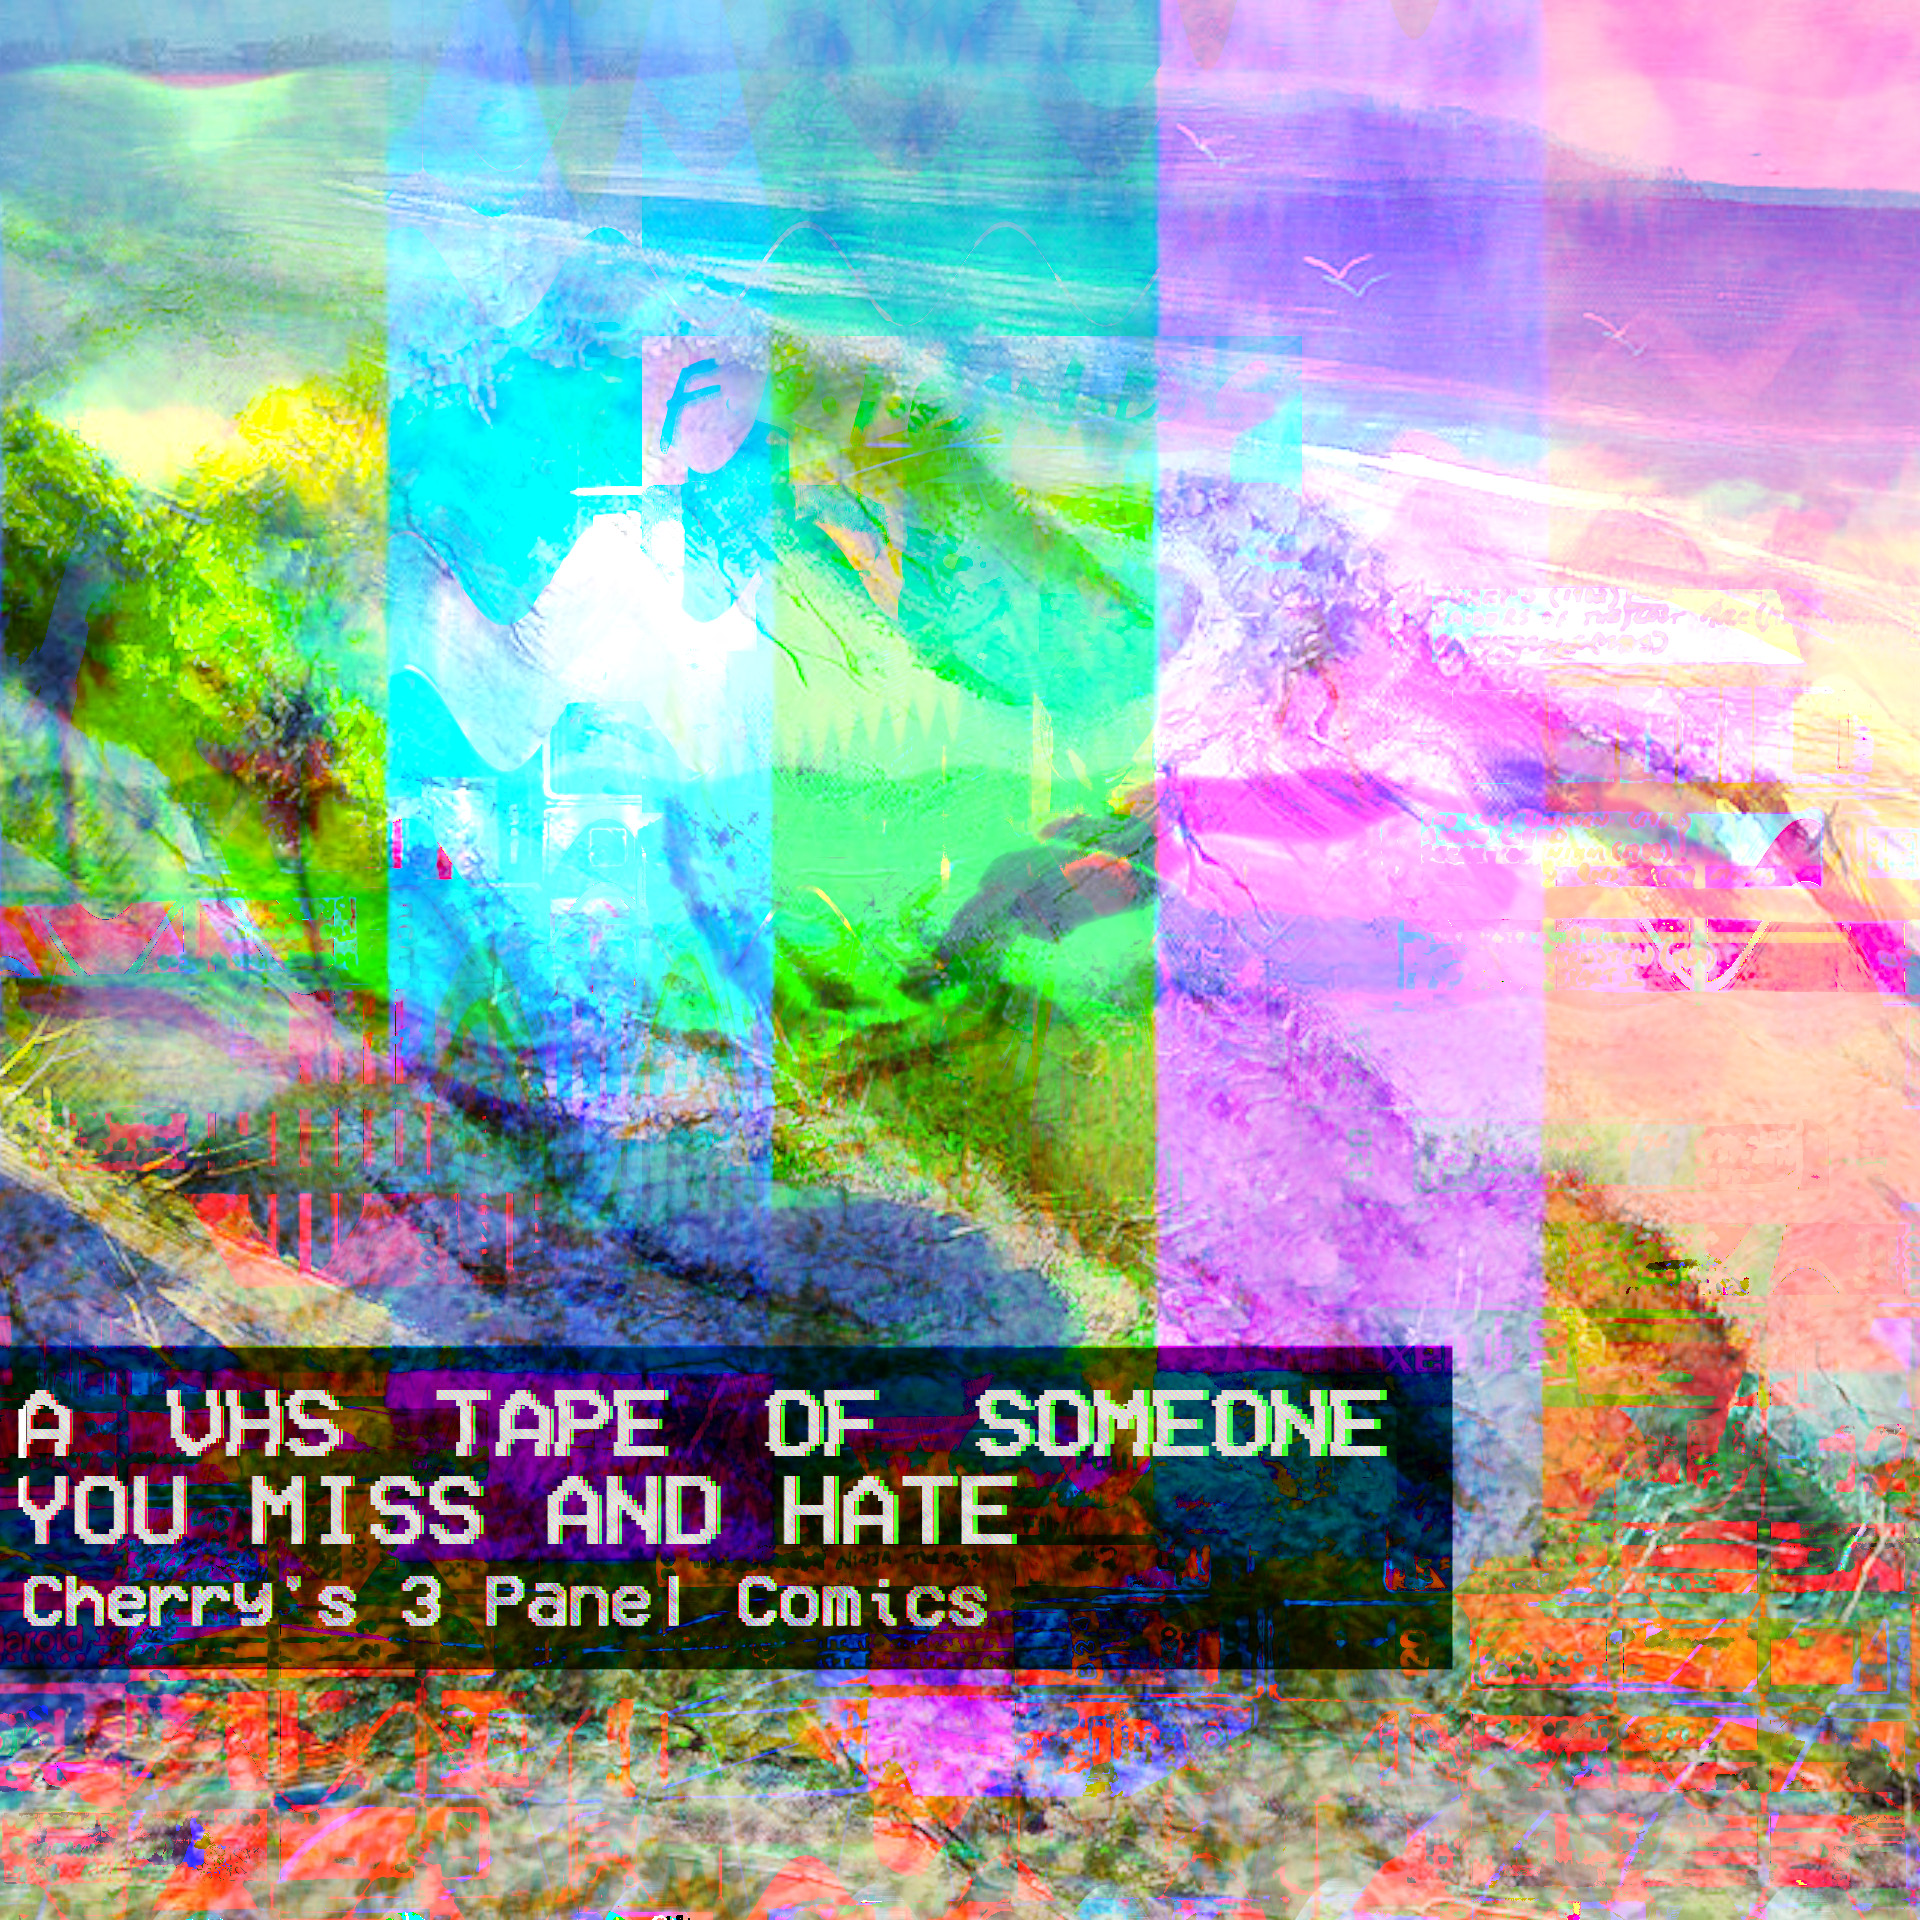 Vertical bars of yellow, teal, green, magenta and red  obscure a surreal beach scene. Text reads A VHS Tape of someone you miss and hate by cherry's 3 panel comics